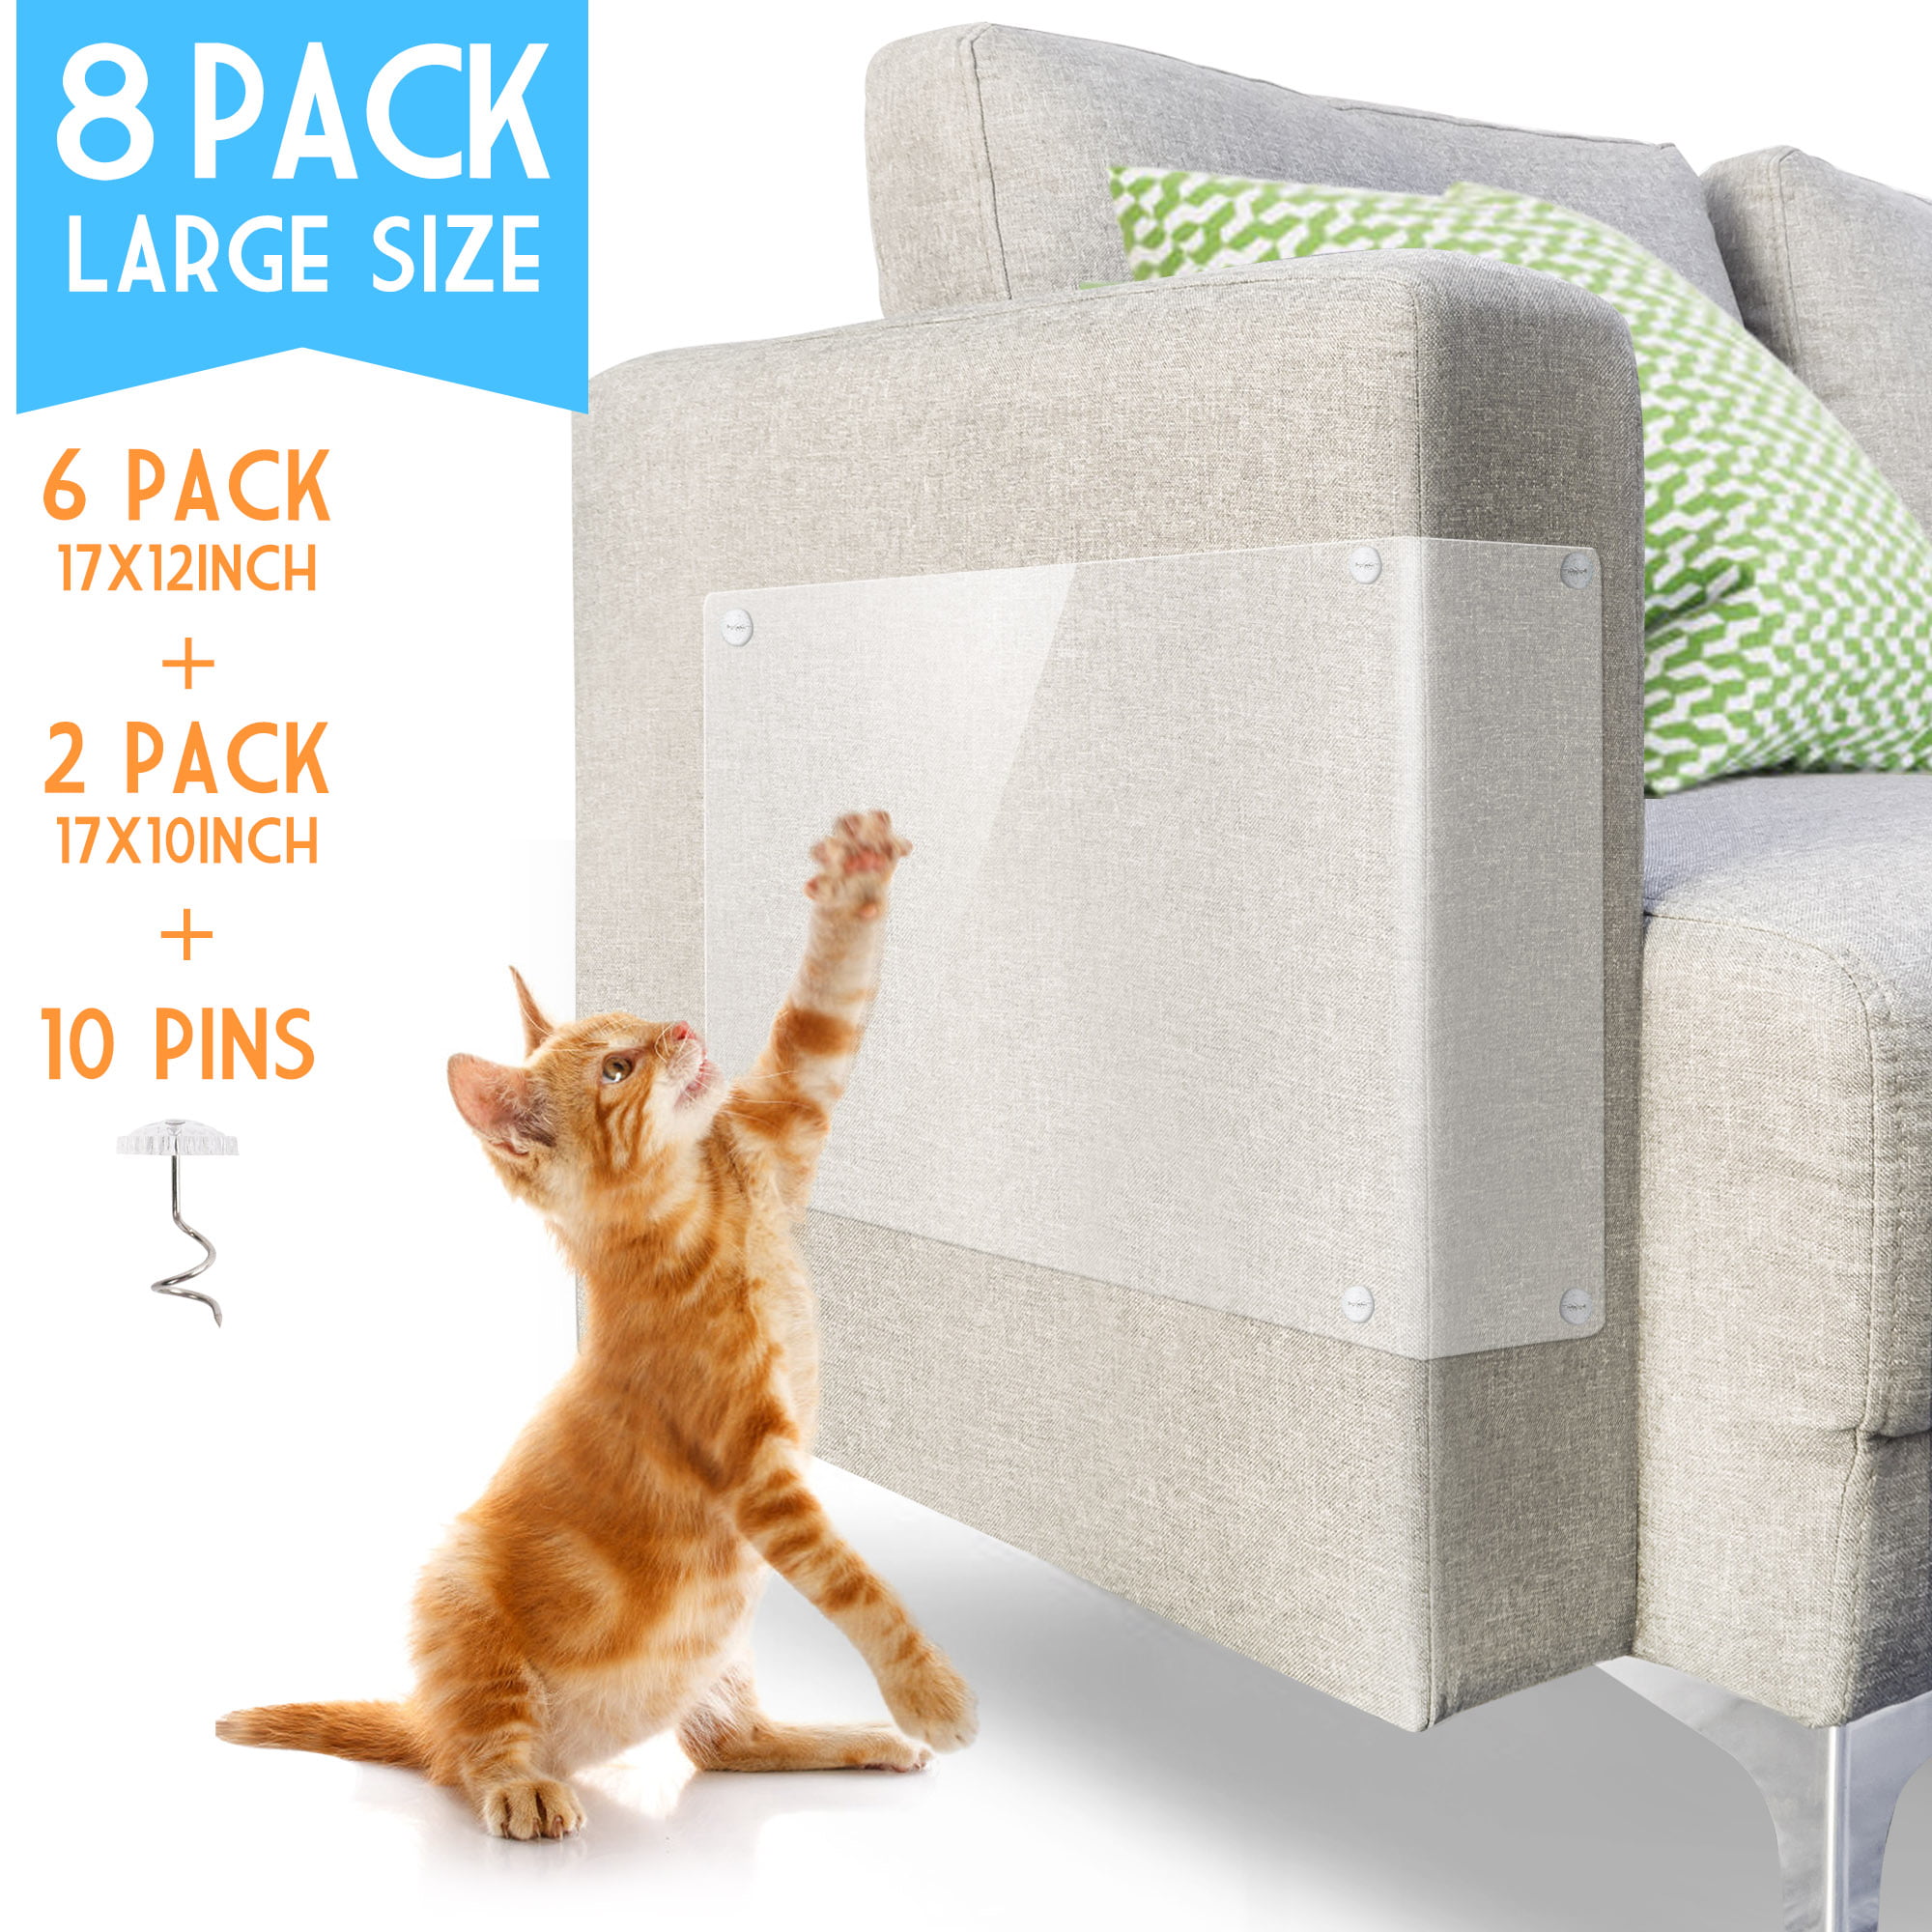 8Pack Cat Couch Protector, Furniture Protectors from Cats, 2Pack 17x10